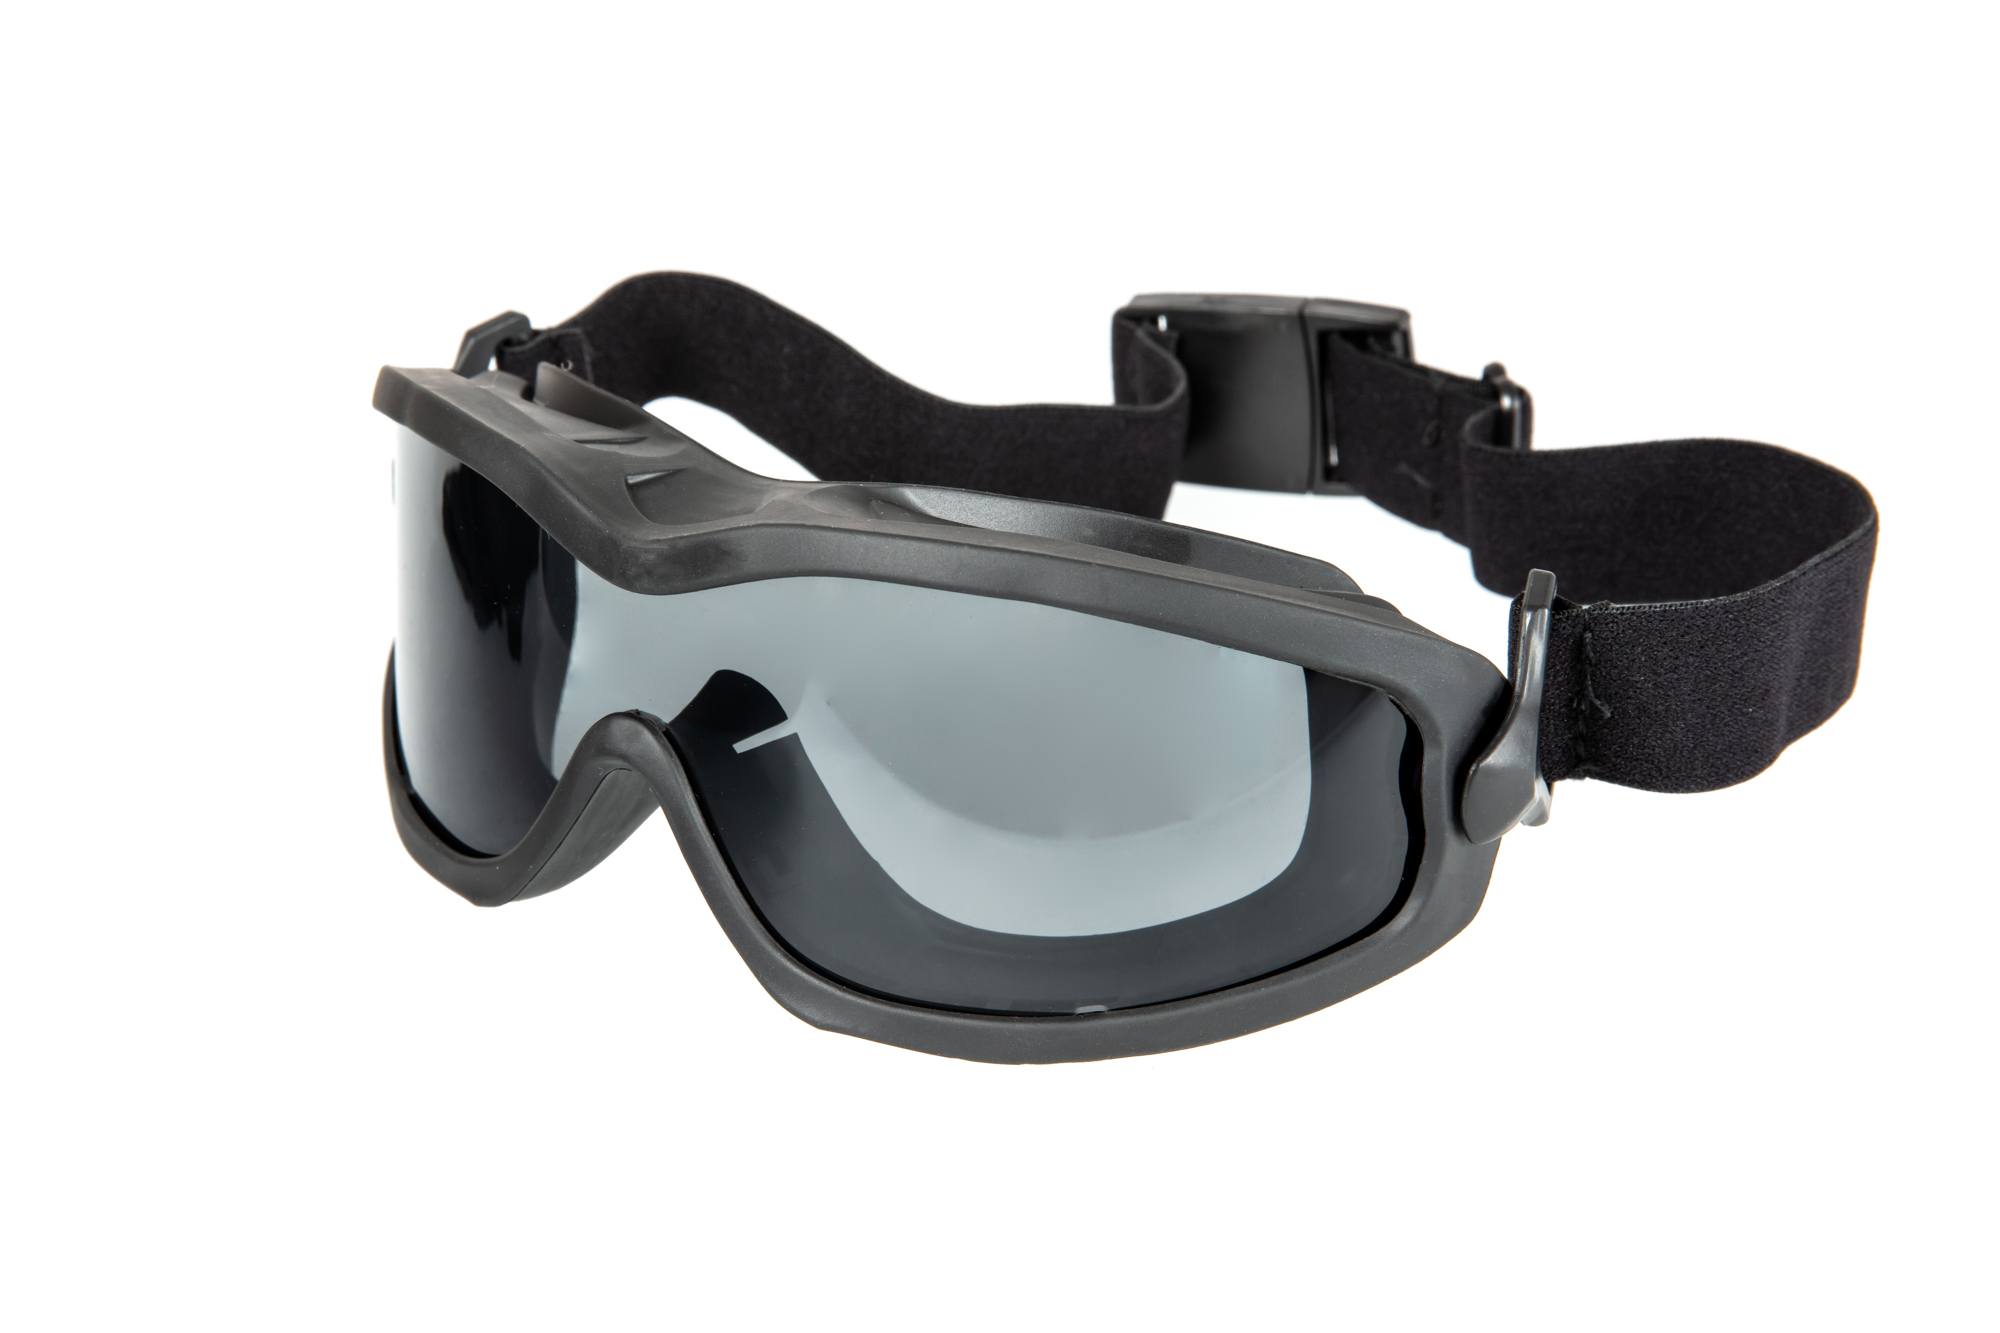 Spectra Double Layer Goggles – Black